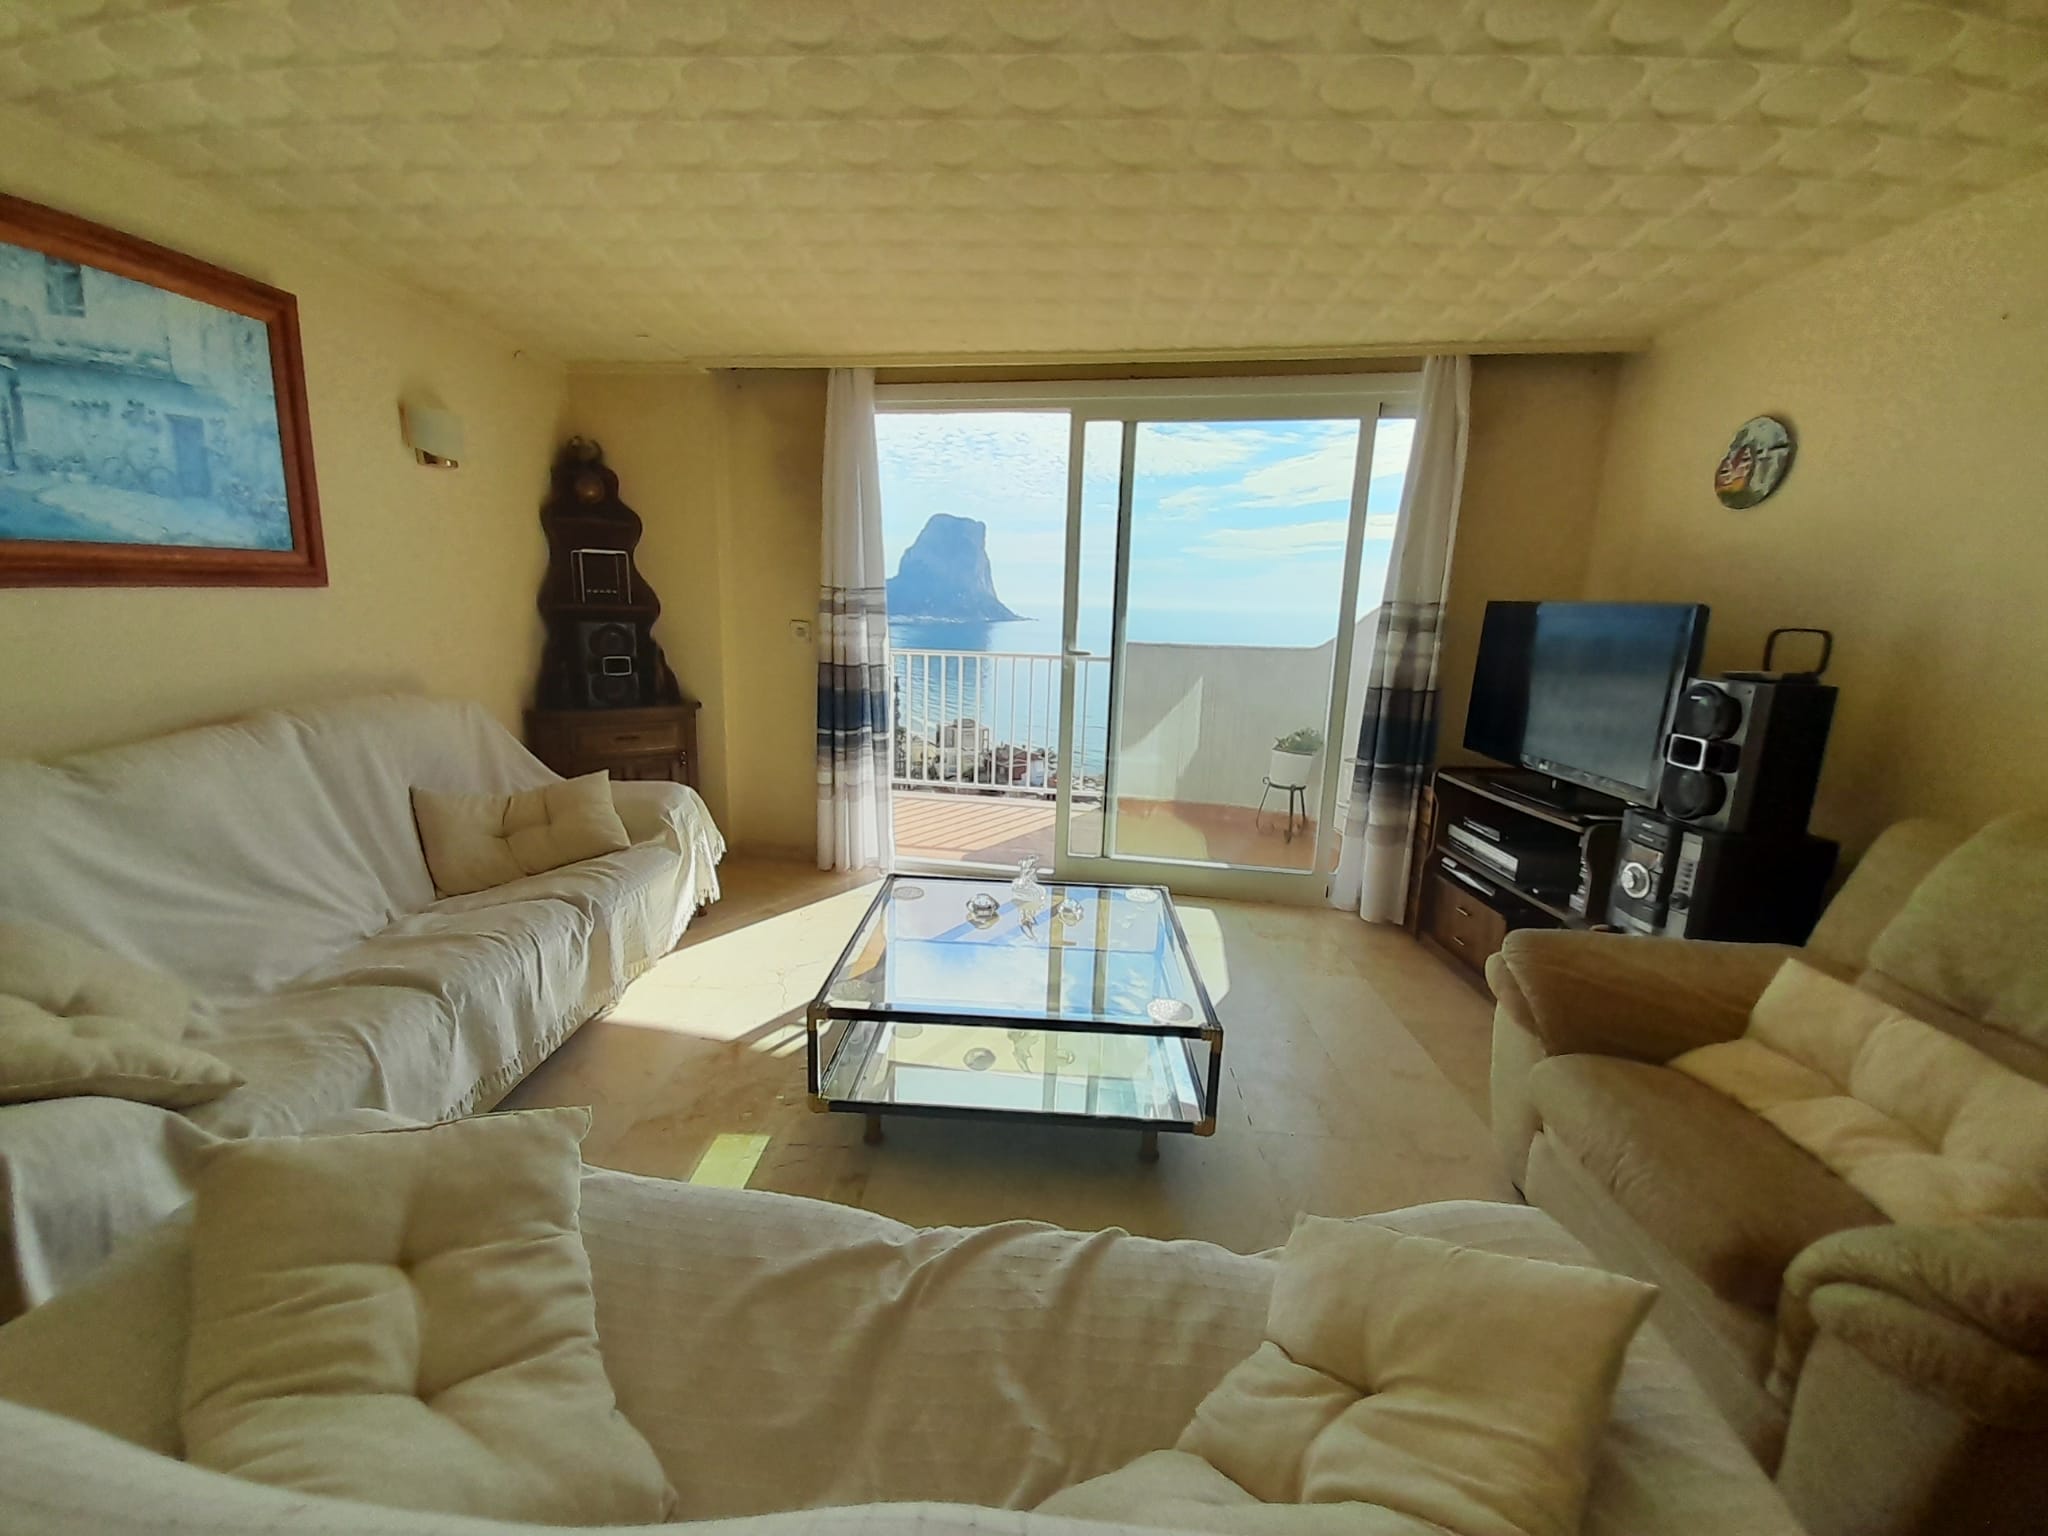 Corner apartment in a beloved Calpe building located next to the center, Plaza Mayor and the Arenal Bol beach. The block has the possibility of parking and a communal swimming pool with its lounge area, communal storage room. In addition, there is a gym available just a 1 minute walk from the entrance of the building.  The apartment has 3 large bedrooms with their fitted wardrobes. From the master bedroom you have access to the terrace to enjoy the views of the Peñon de Ifach and the sea.  The kitchen is independent, next to it you have a laundry/storage room with its washing machine. The living room is spacious with sea views and access to the terrace. There is a bathroom with a bathtub. New double-glazed windows and shutters have been installed throughout the apartment.  Sunny apartment ideal for living all year round or for rent!